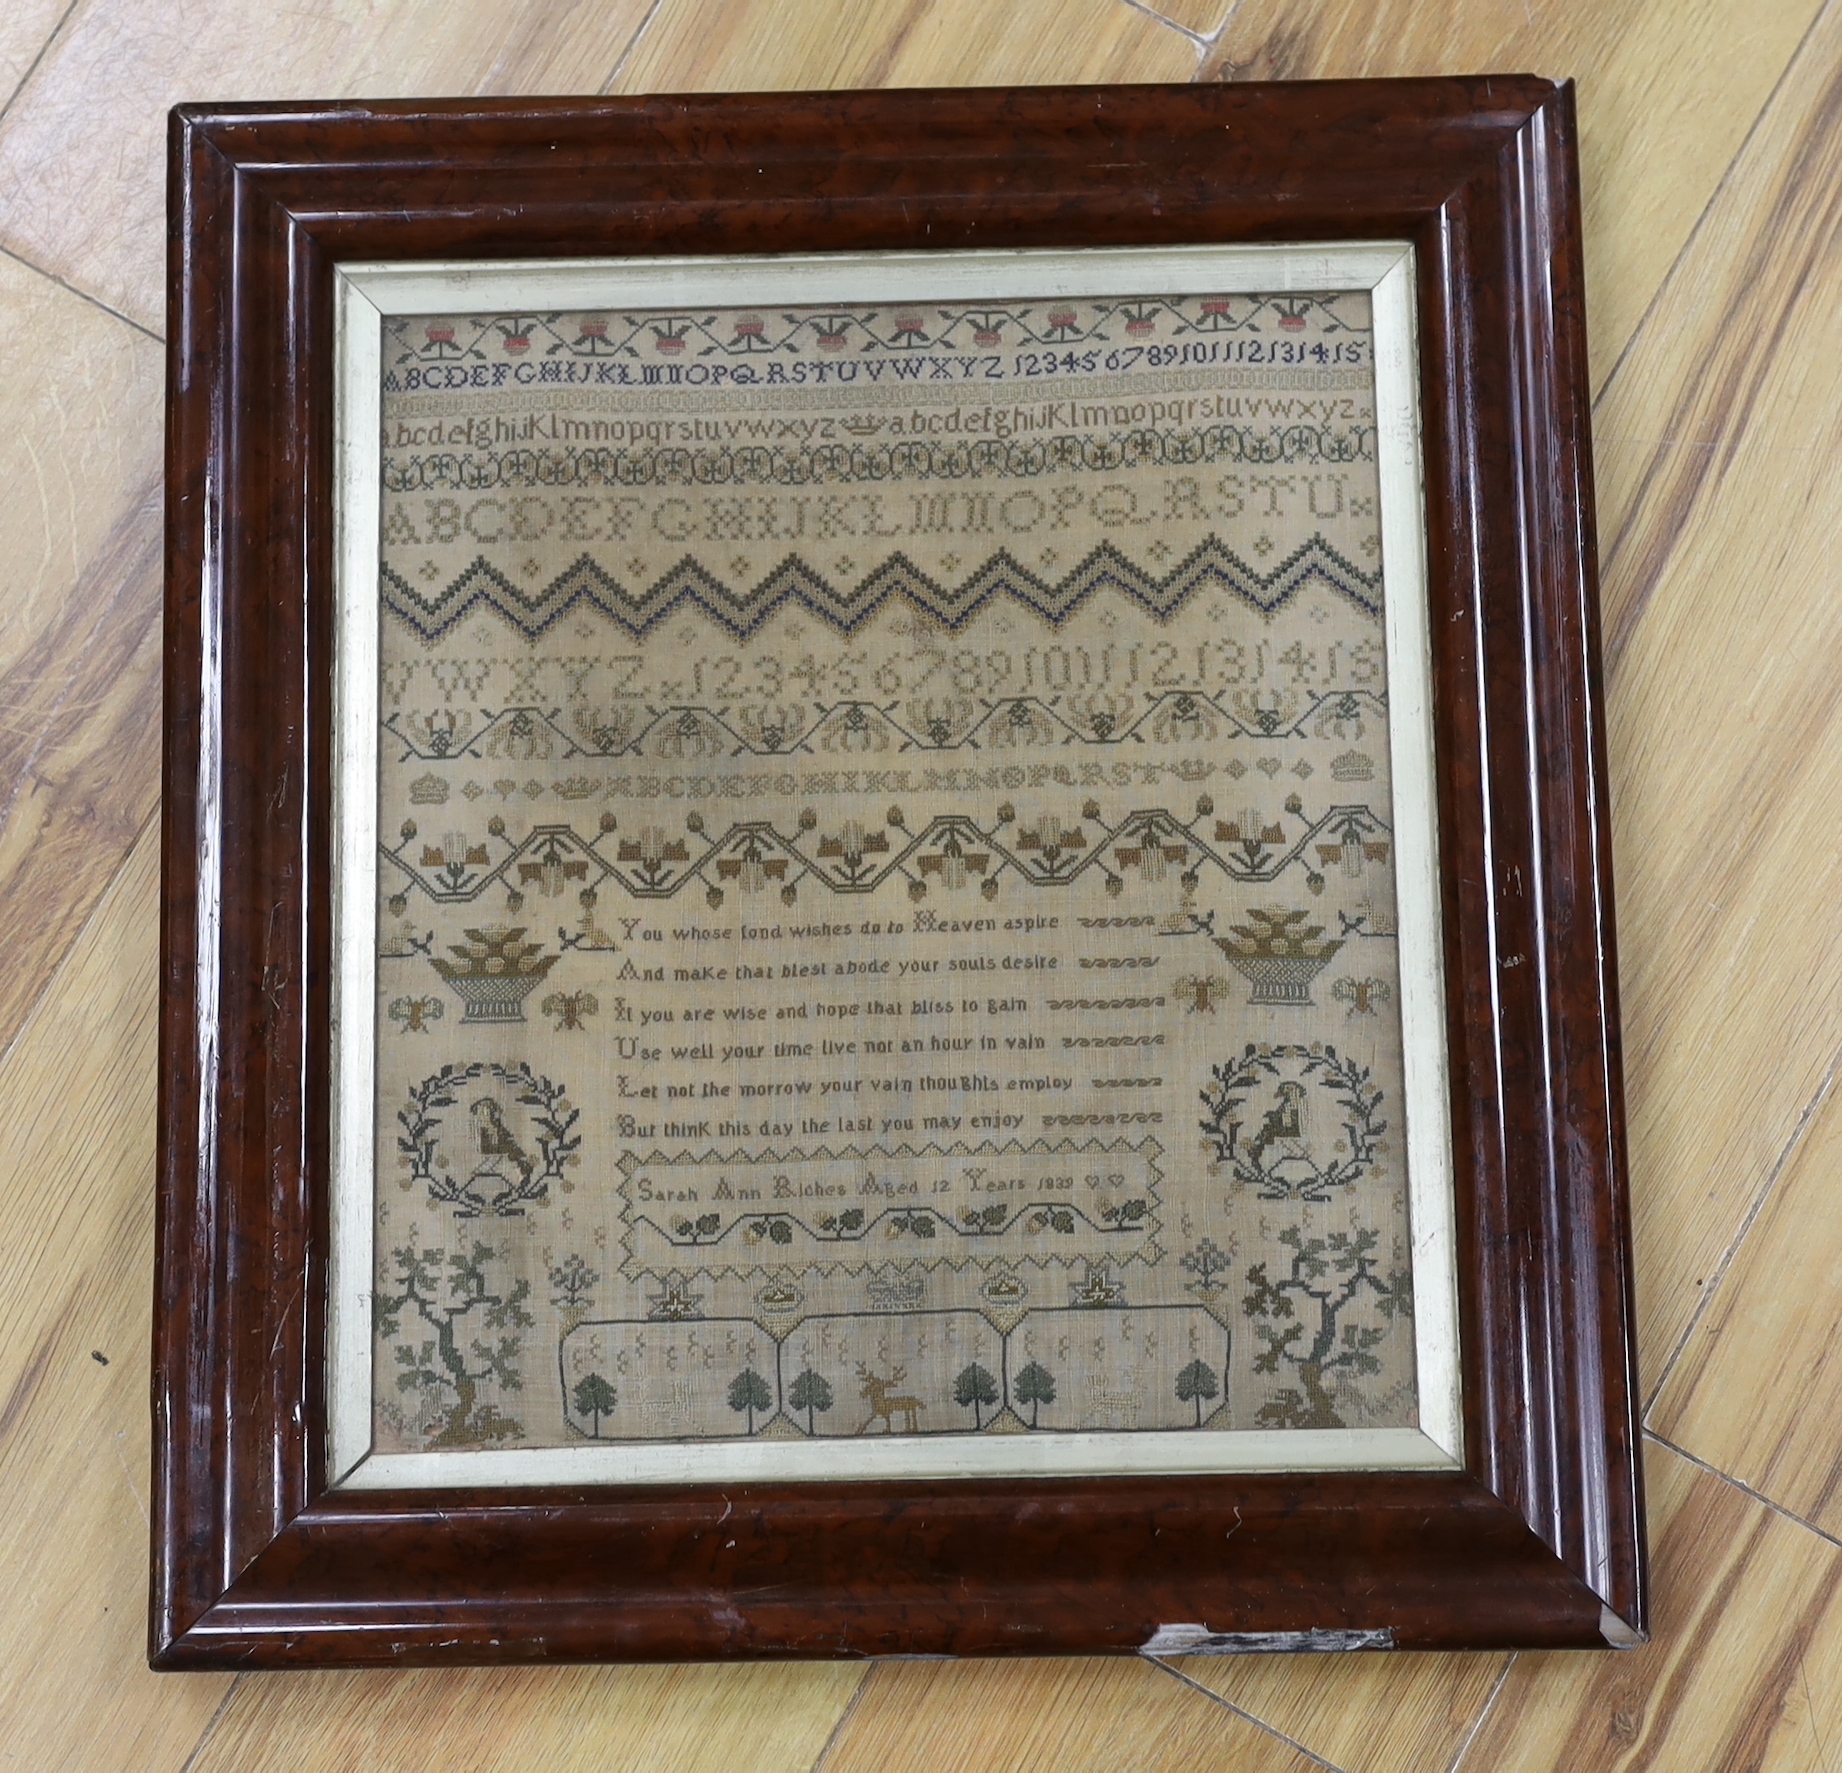 A framed early Victorian very finely worked cross stitch alphabet and spot motif sampler, dated 1839, by Sarah Ann Riches aged 12 years, 30cm wide x 33cm high